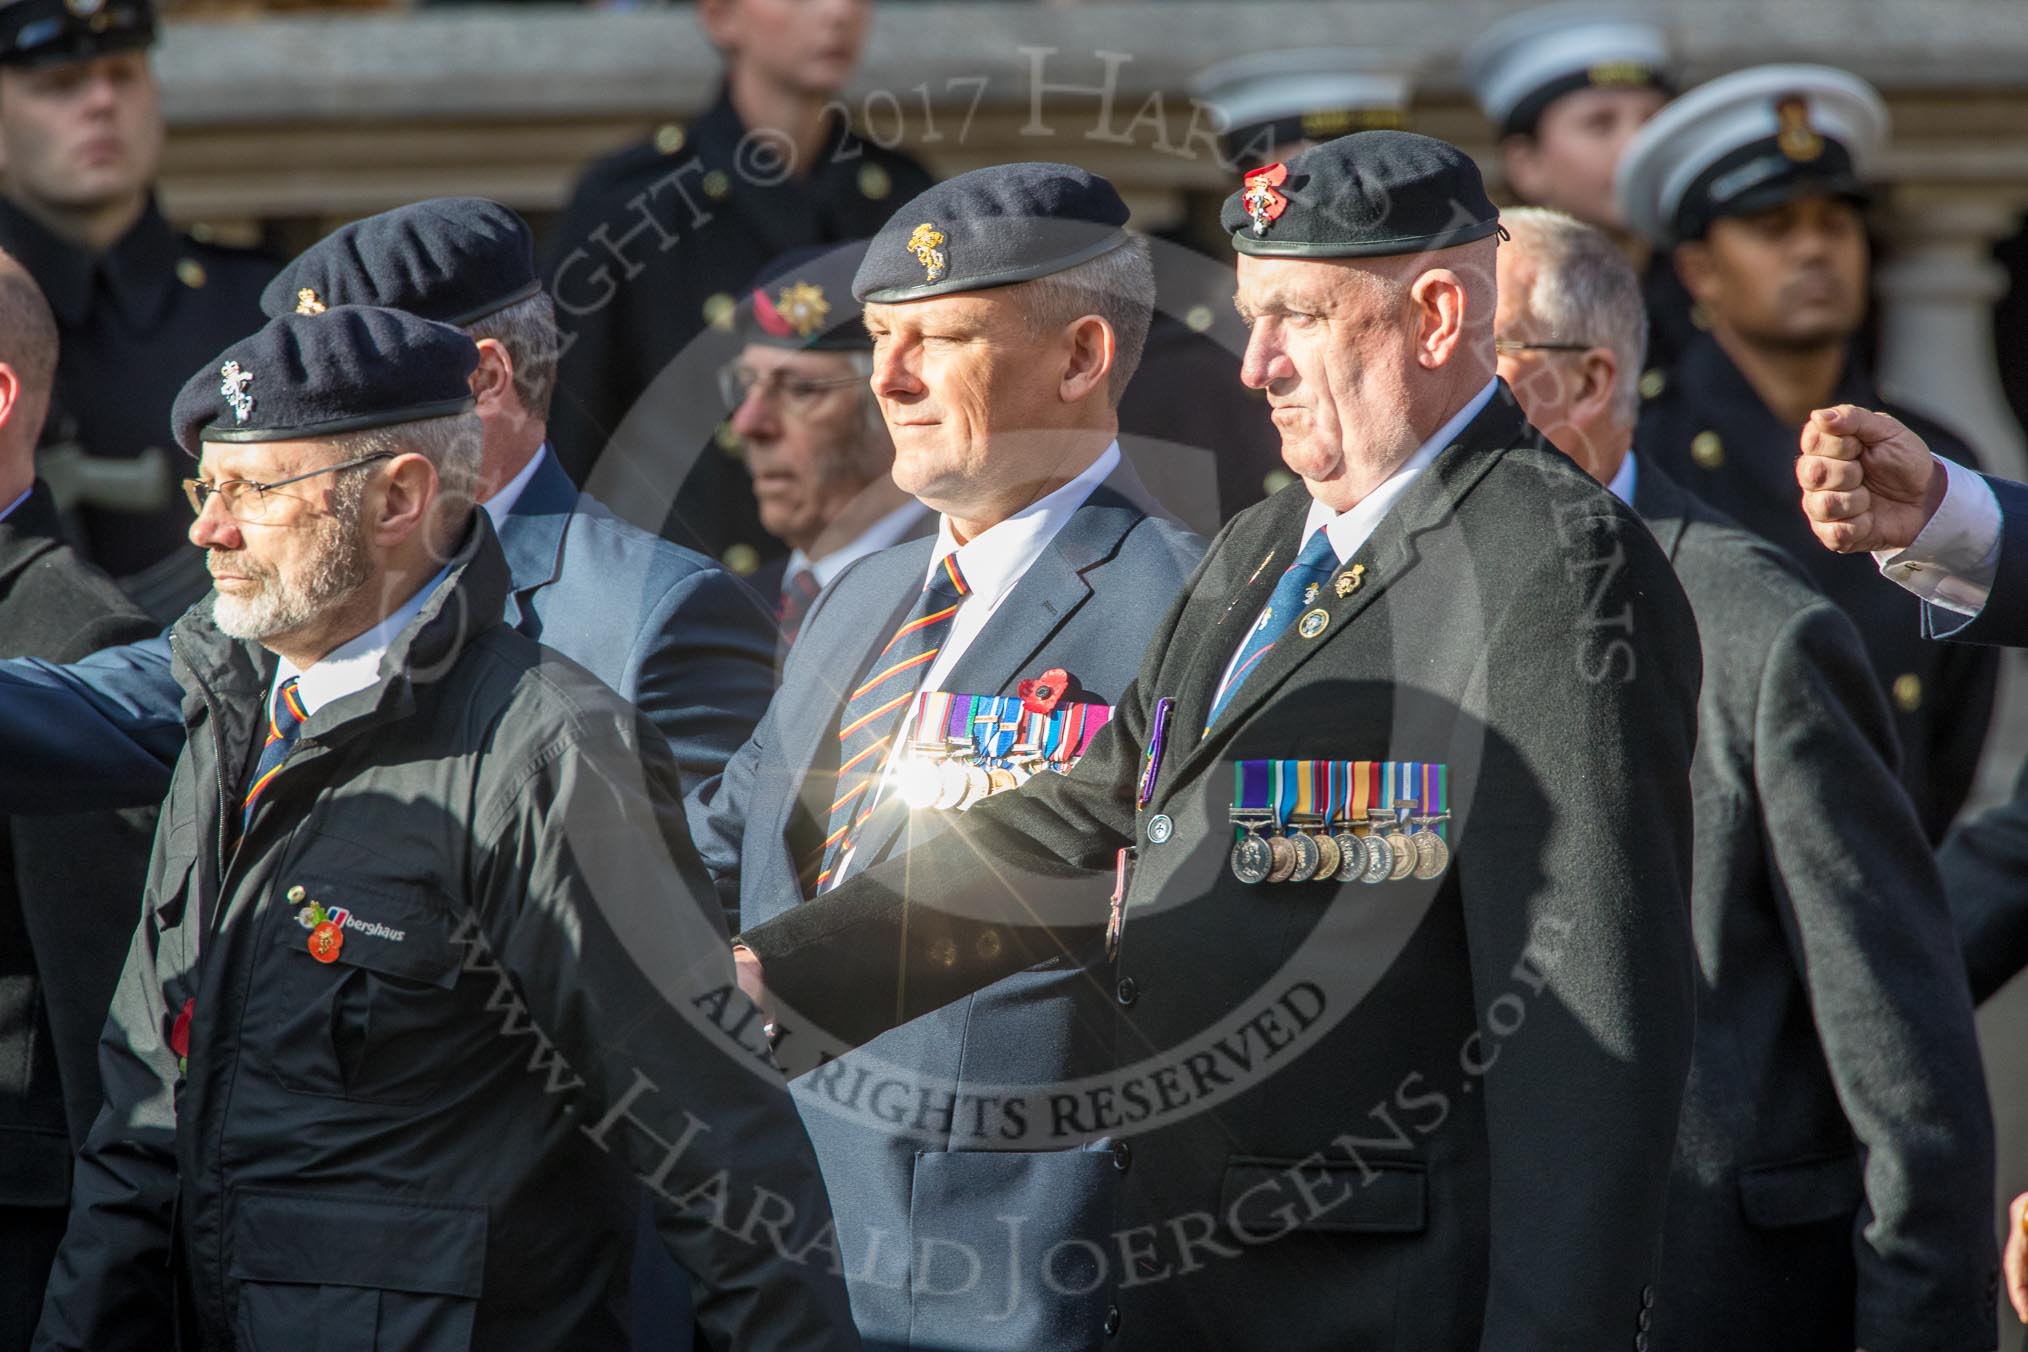 The Royal British Legion (Group D15, 150 members) during the Royal British Legion March Past on Remembrance Sunday at the Cenotaph, Whitehall, Westminster, London, 11 November 2018, 12:22.